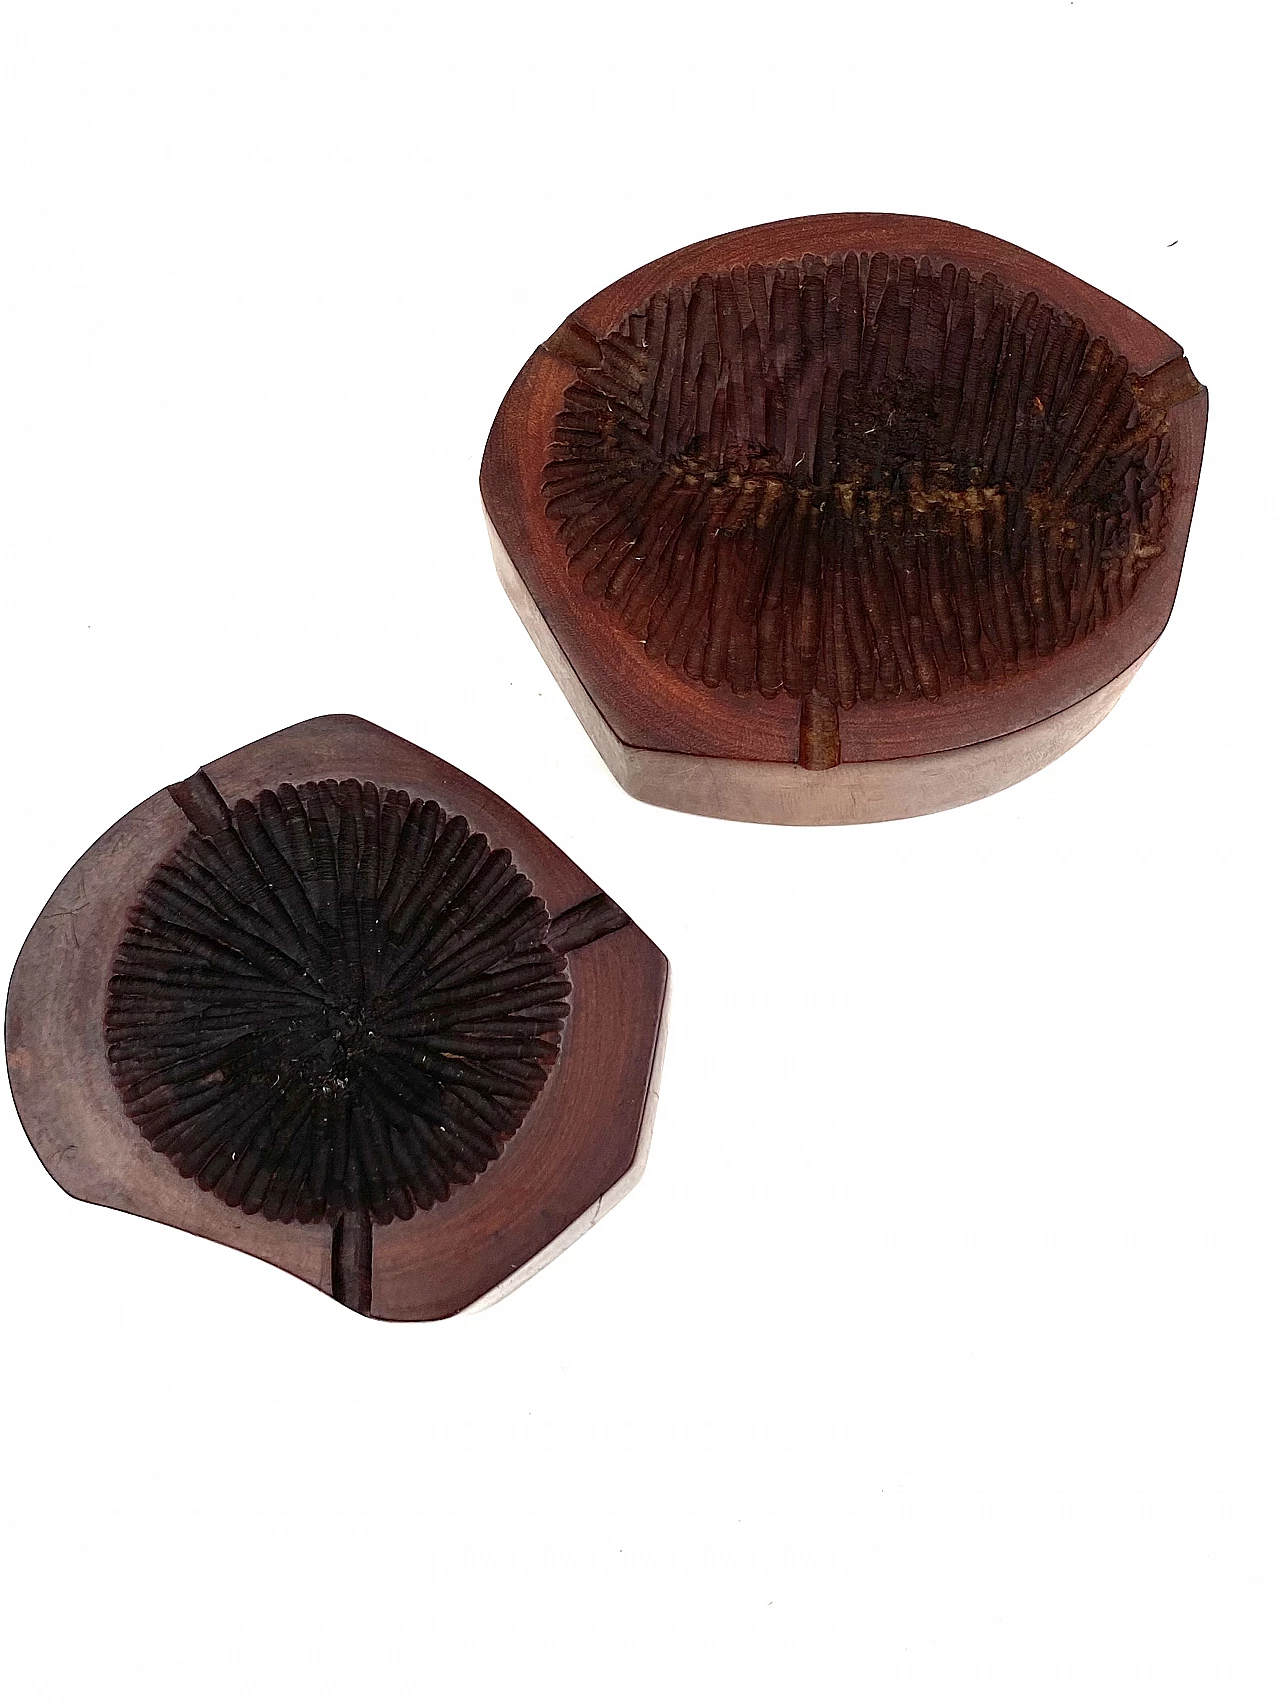 Pair of wooden ashtrays in Monique Gerber's style, 1970s 18